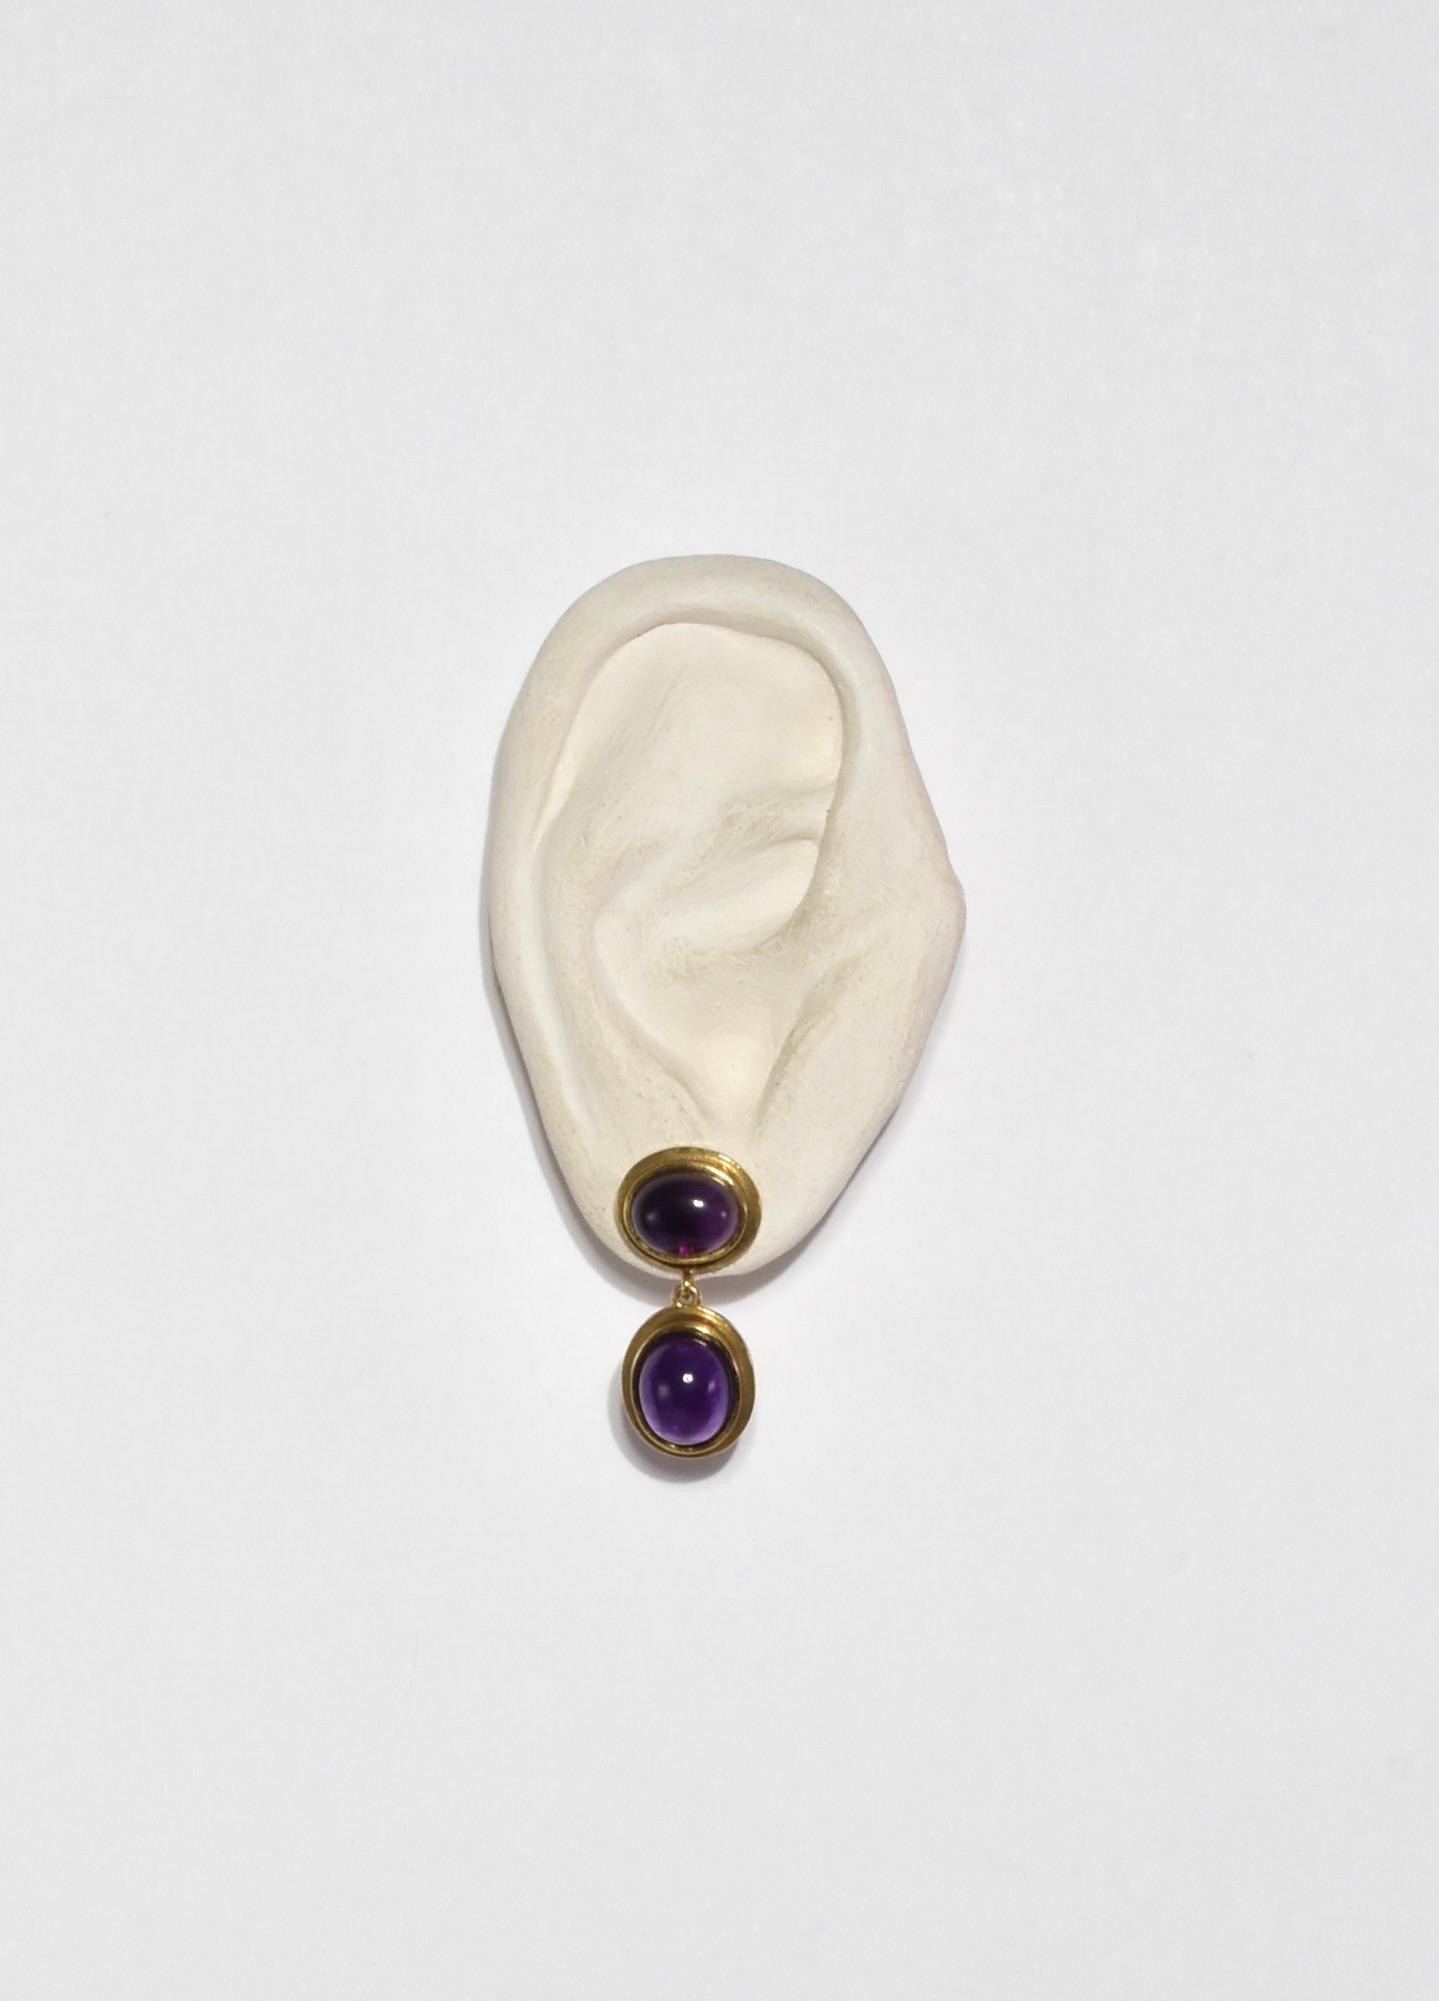 Vintage gold earrings with polished amethyst dome cabochons, pierced. Stamped MMA.

Material: 14k gold plate, amethyst.